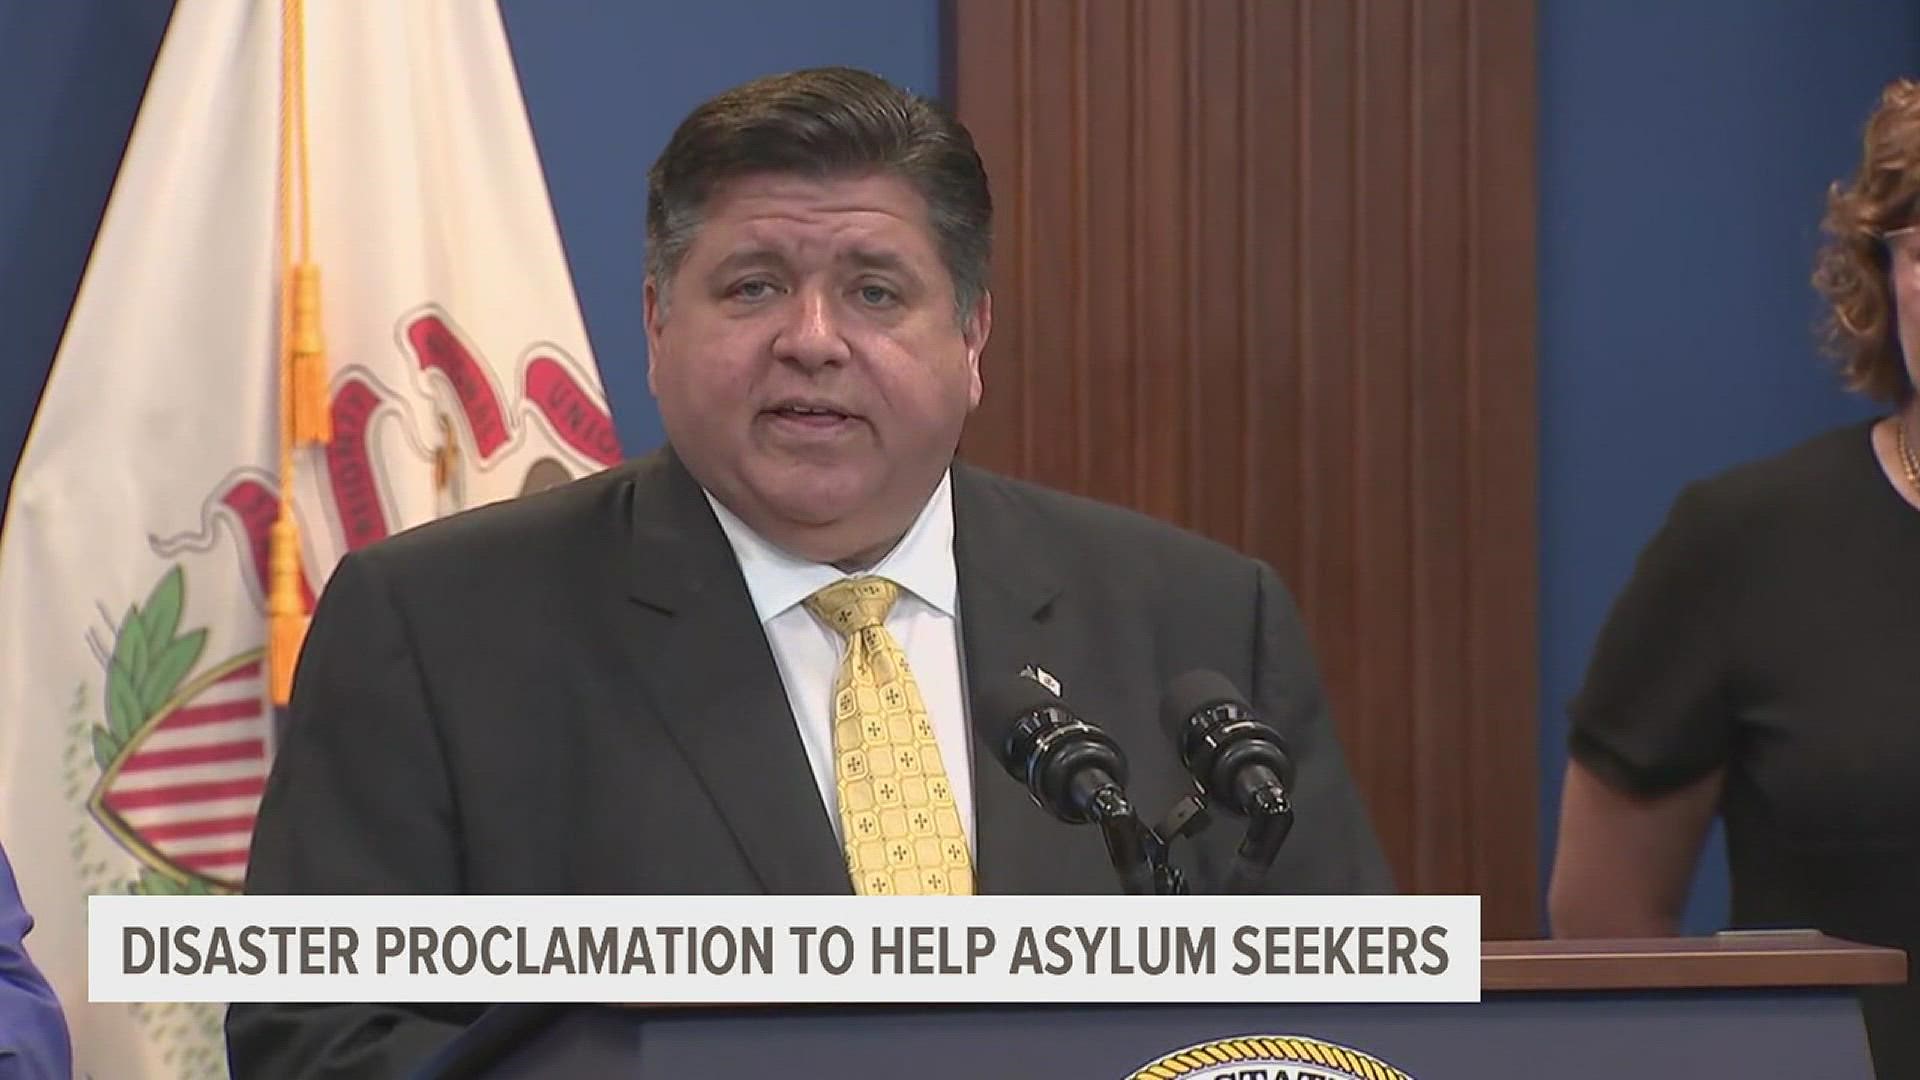 Gov. Pritzker is requesting the help after Texas Gov. Greg Abbott's ordering of the shipping of migrants to Democrat-leaning cities across the country.